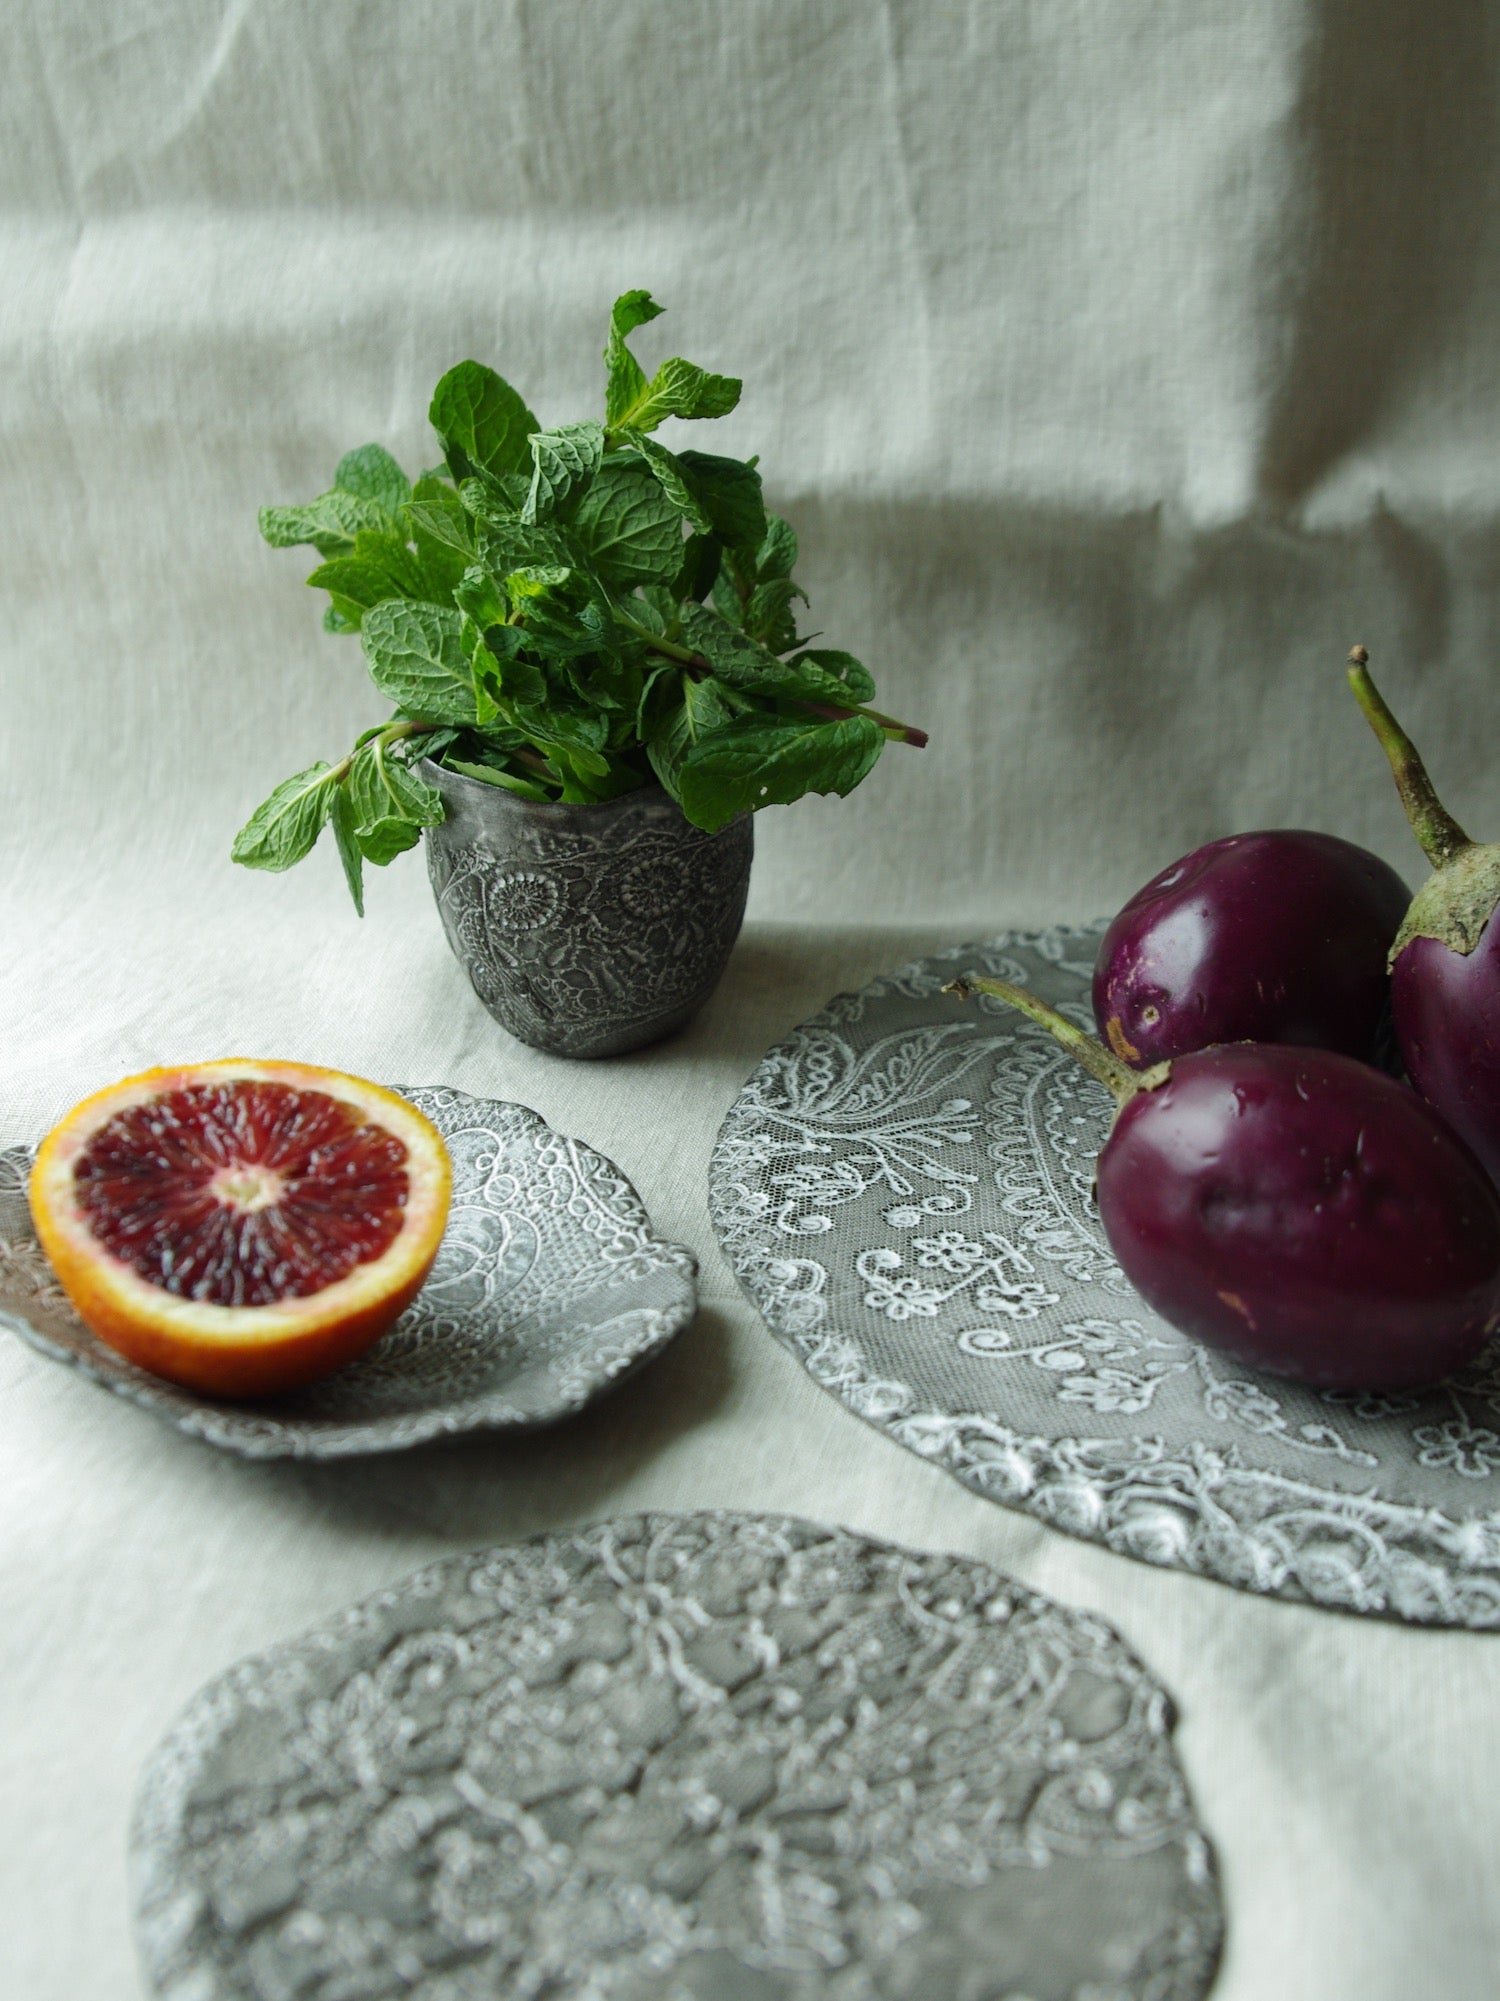 Table setting of lace pattern ceramic serveware with fruits and vegetables